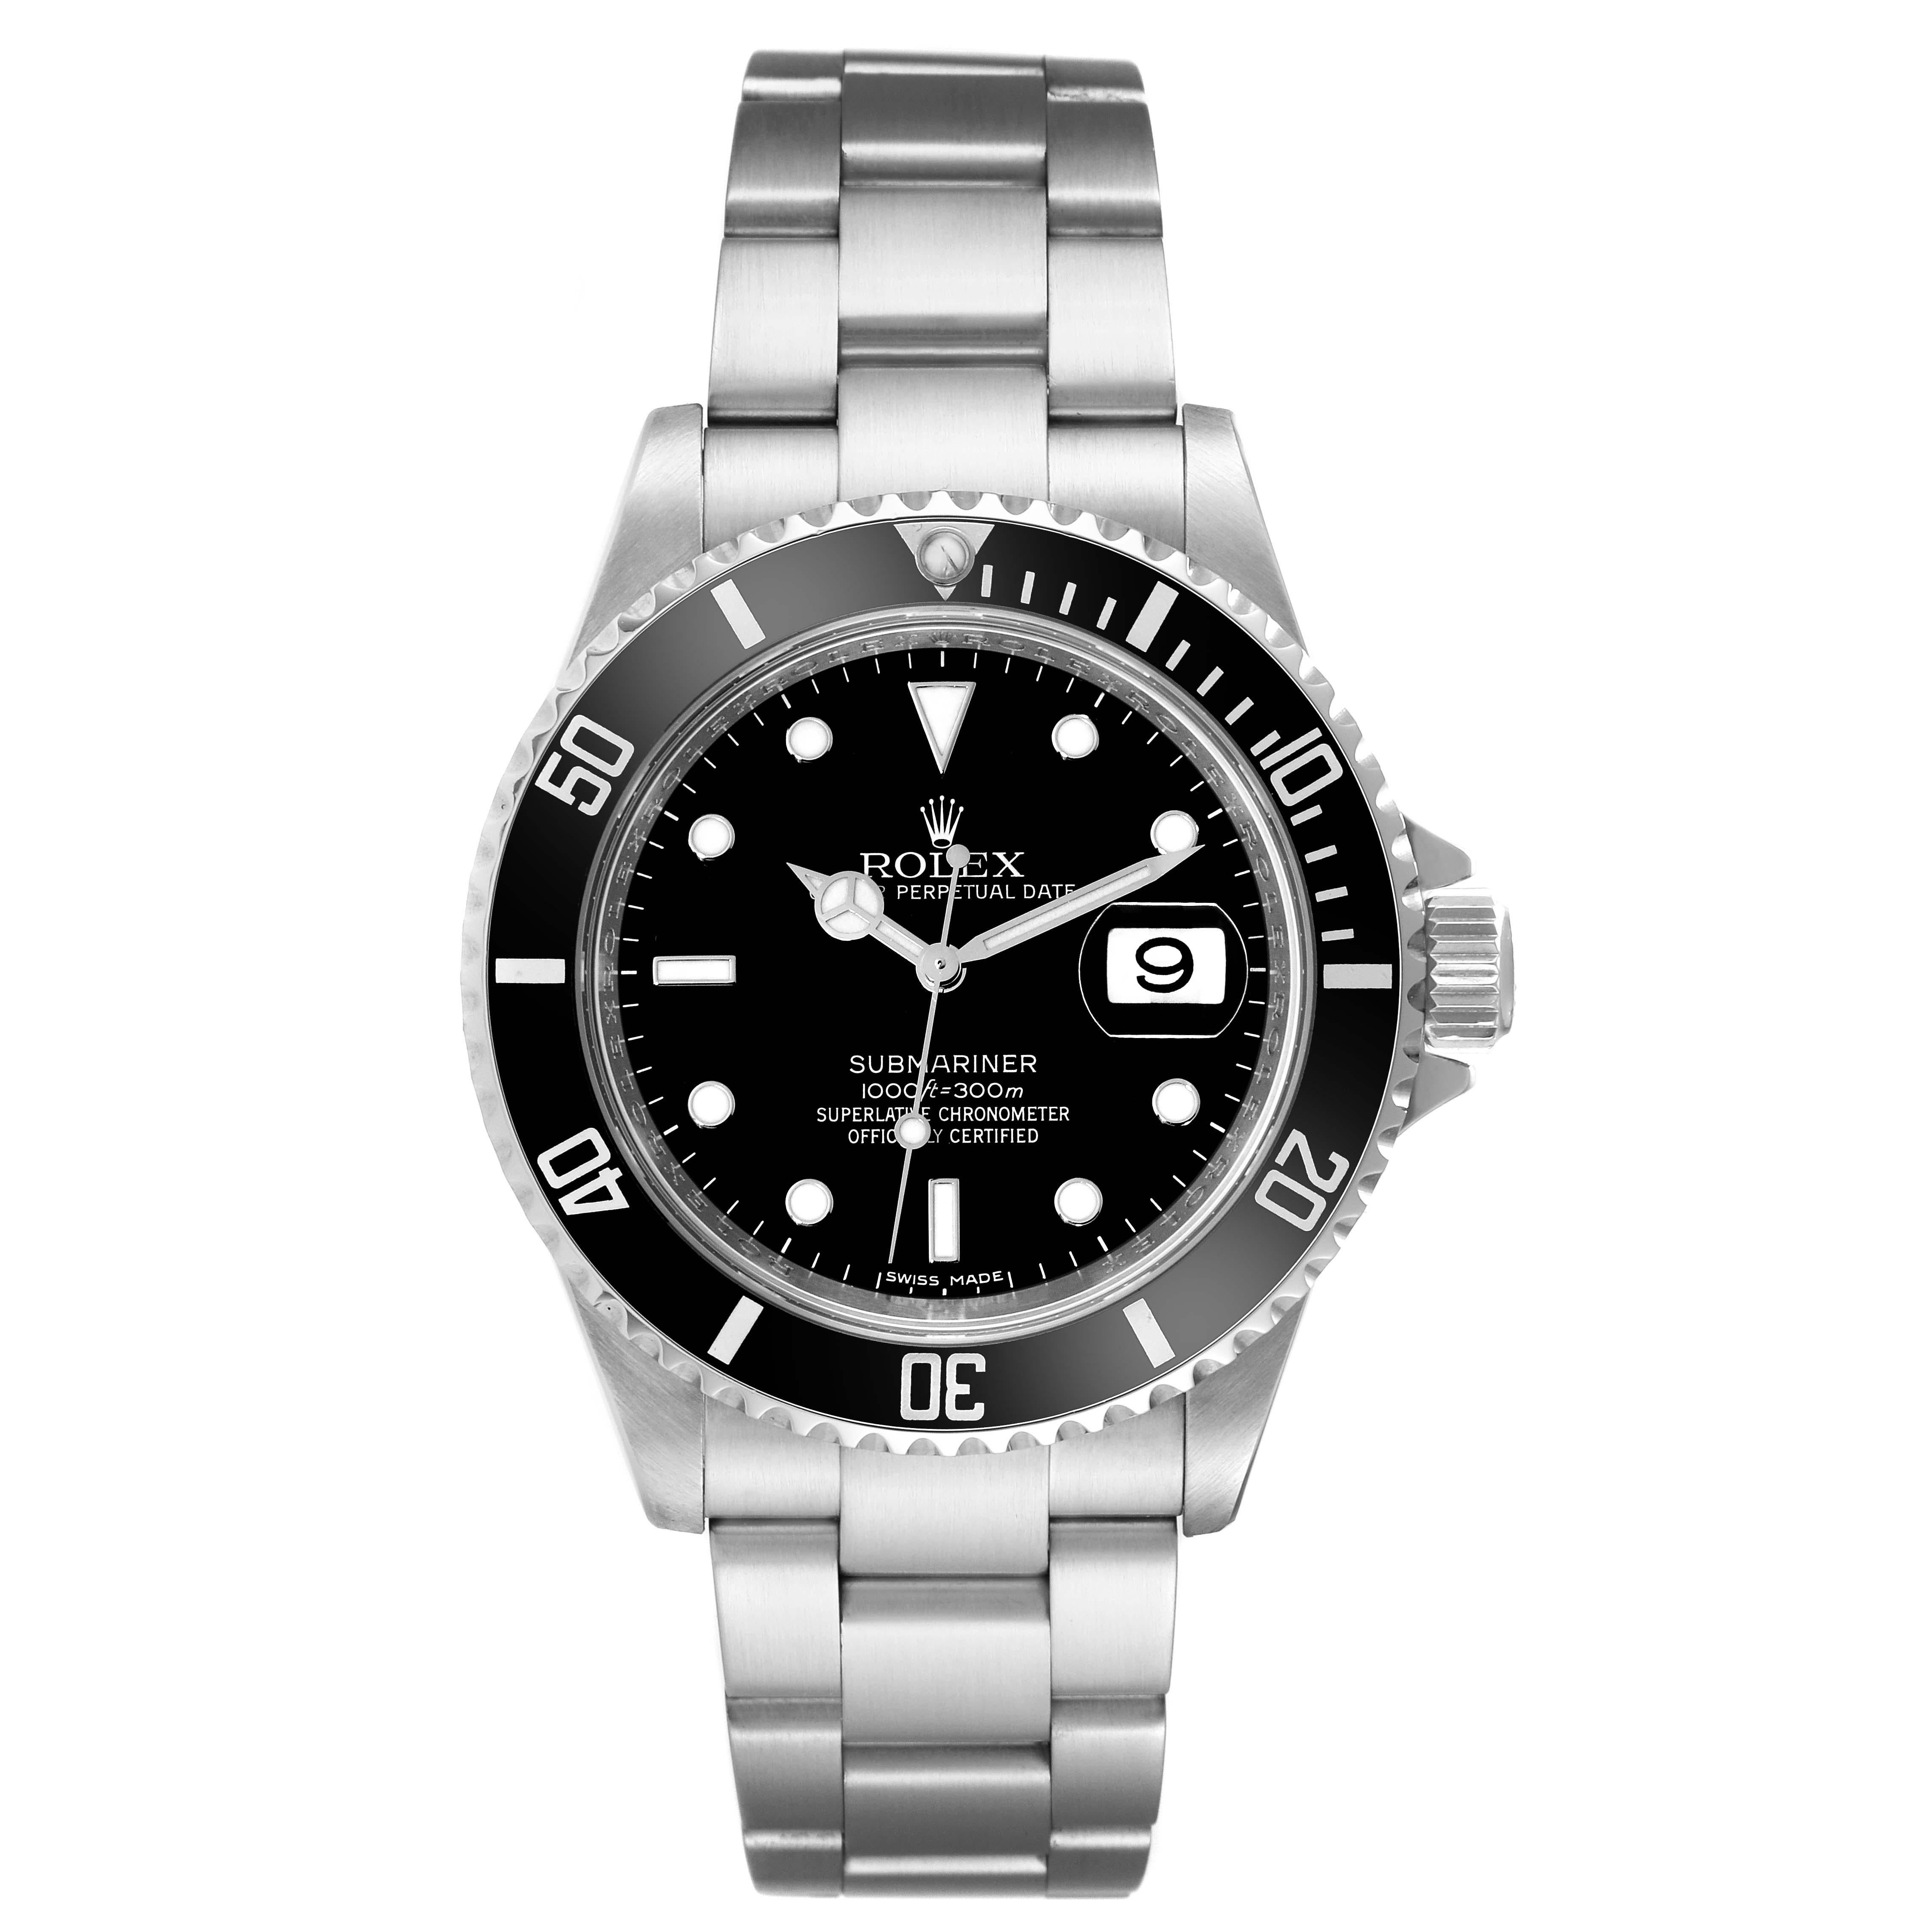 Rolex Submariner Date Black Dial 4 Liner Steel Mens Watch 16610 Box Card. Officially certified chronometer automatic self-winding movement. Stainless steel case 40.0 mm in diameter. Rolex logo on the crown. Special time-lapse unidirectional rotating